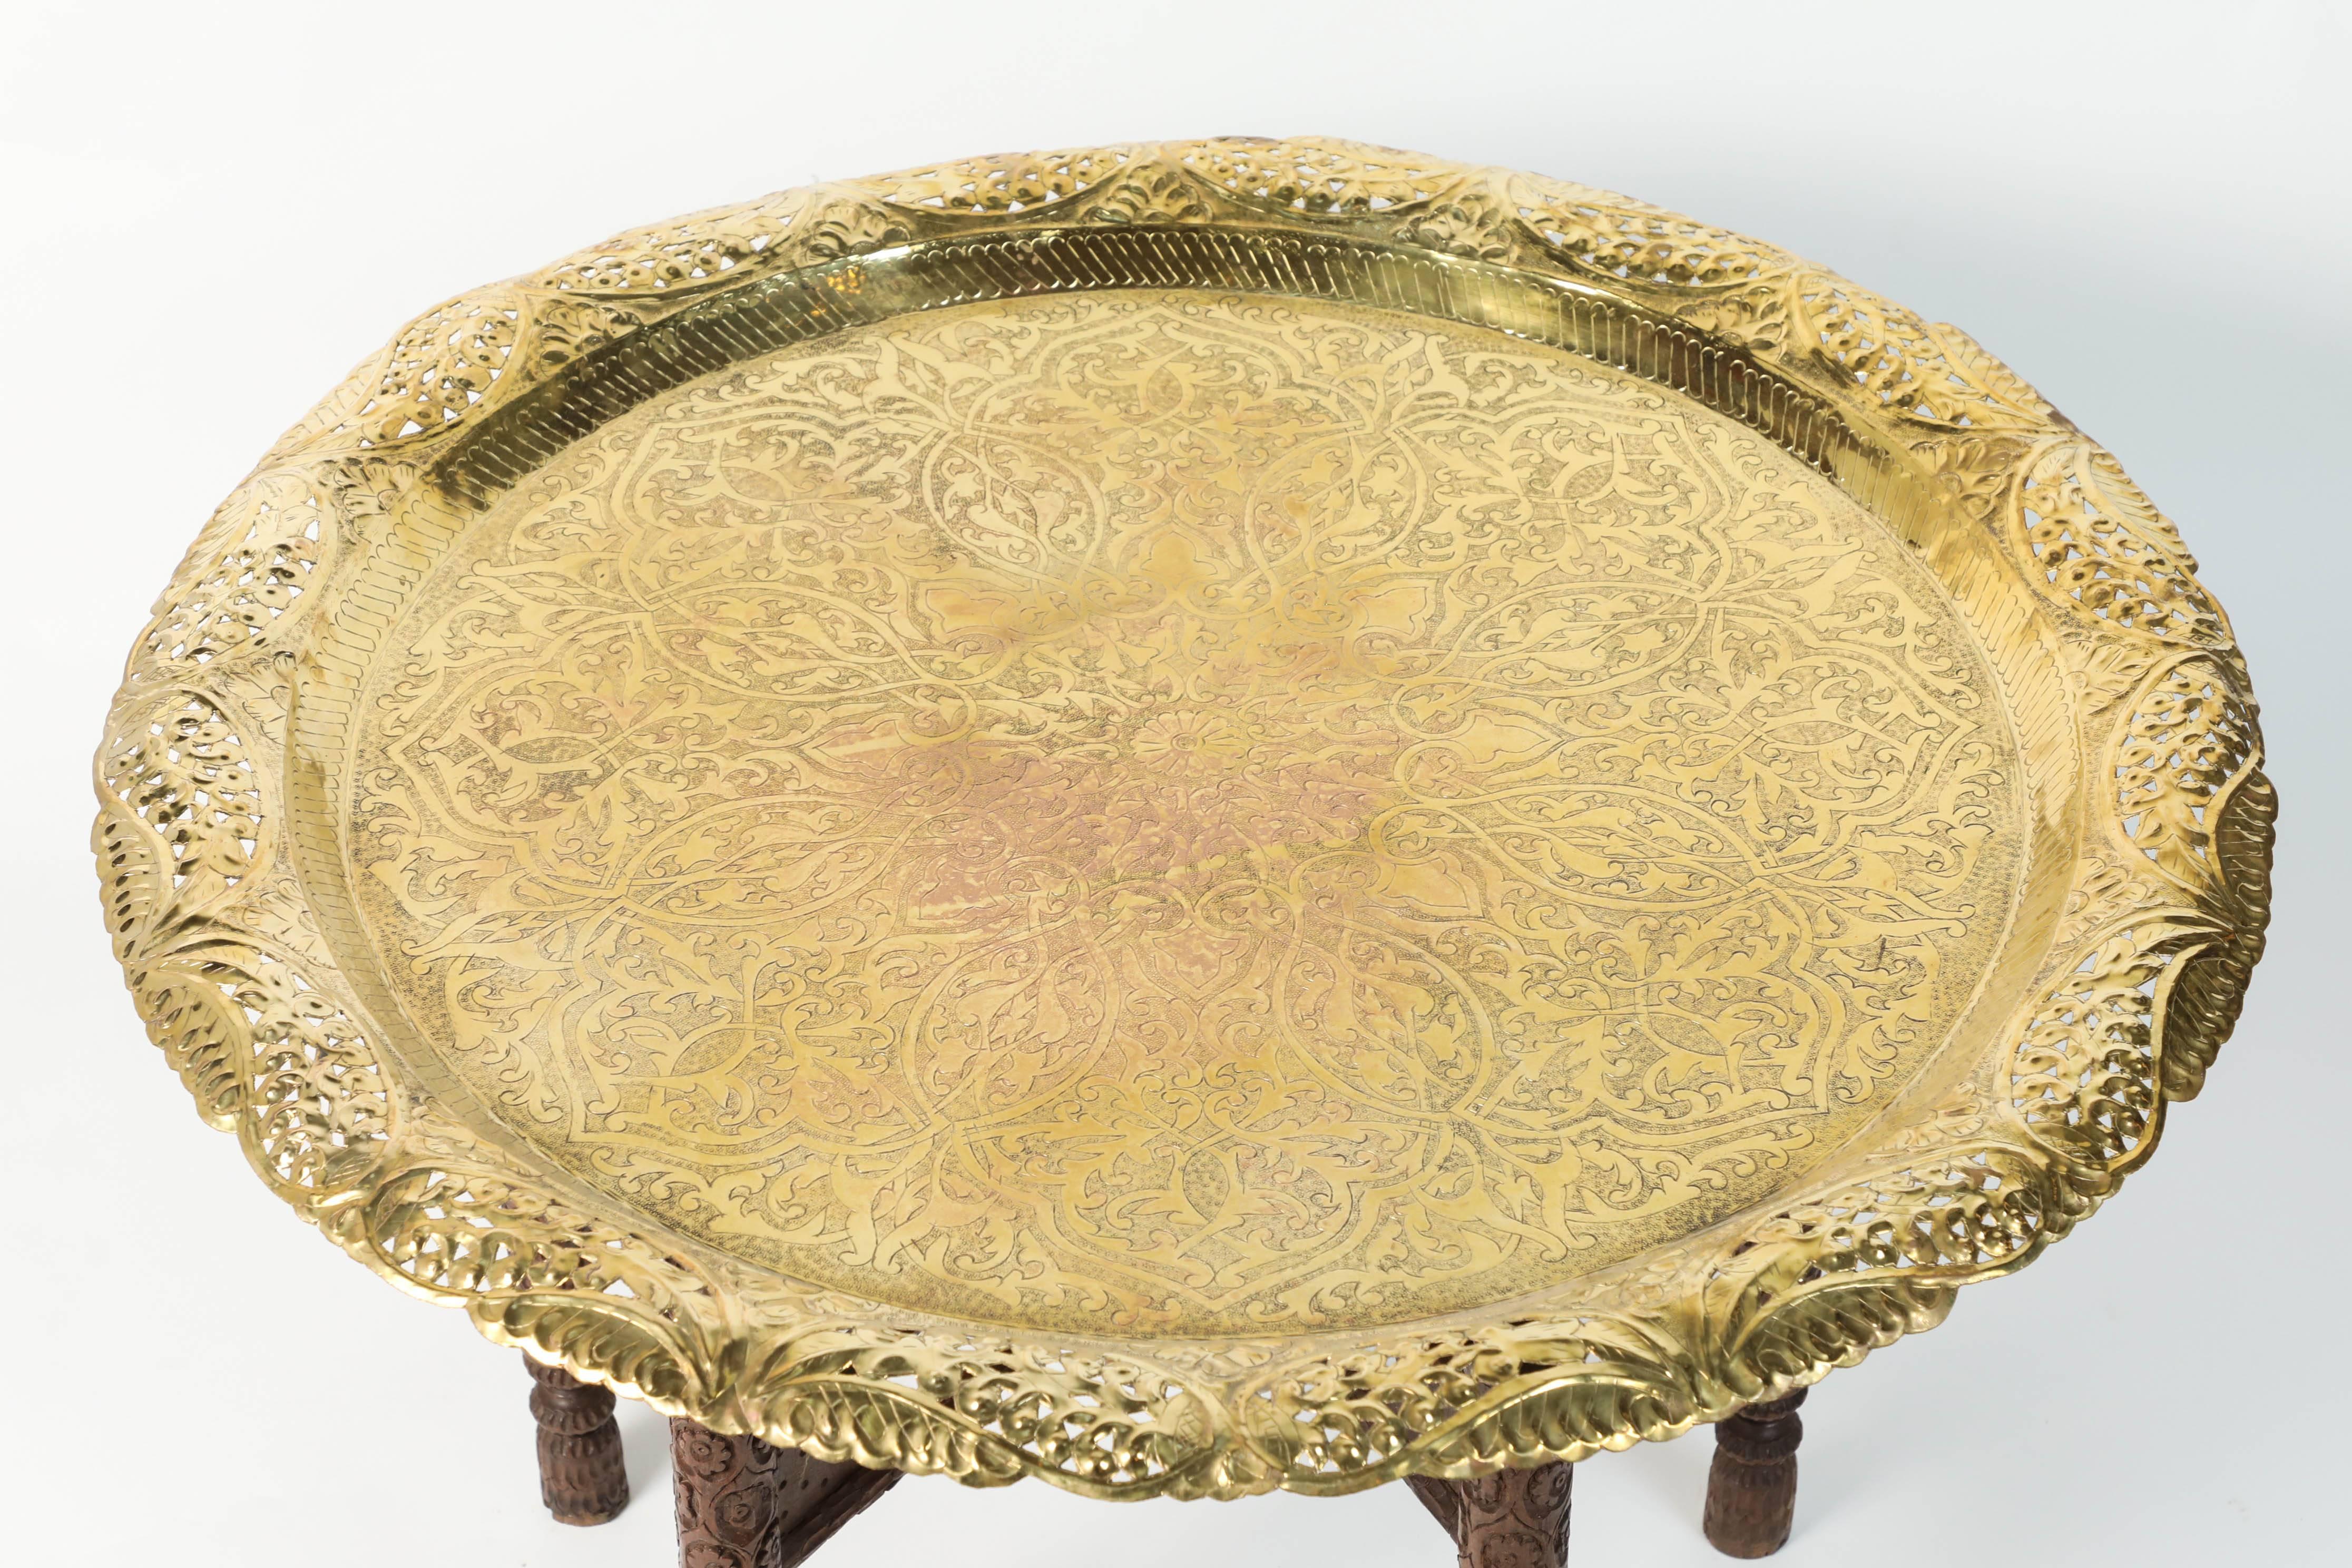 Anglo-Indian engraved and embossed large round polished brass tray coffee table.
Polished Middle Eastern style brass tray, standing on folding wooden base with six legs.
Large Moorish style hand-hammered brass tray table, Middle Eastern, Moorish